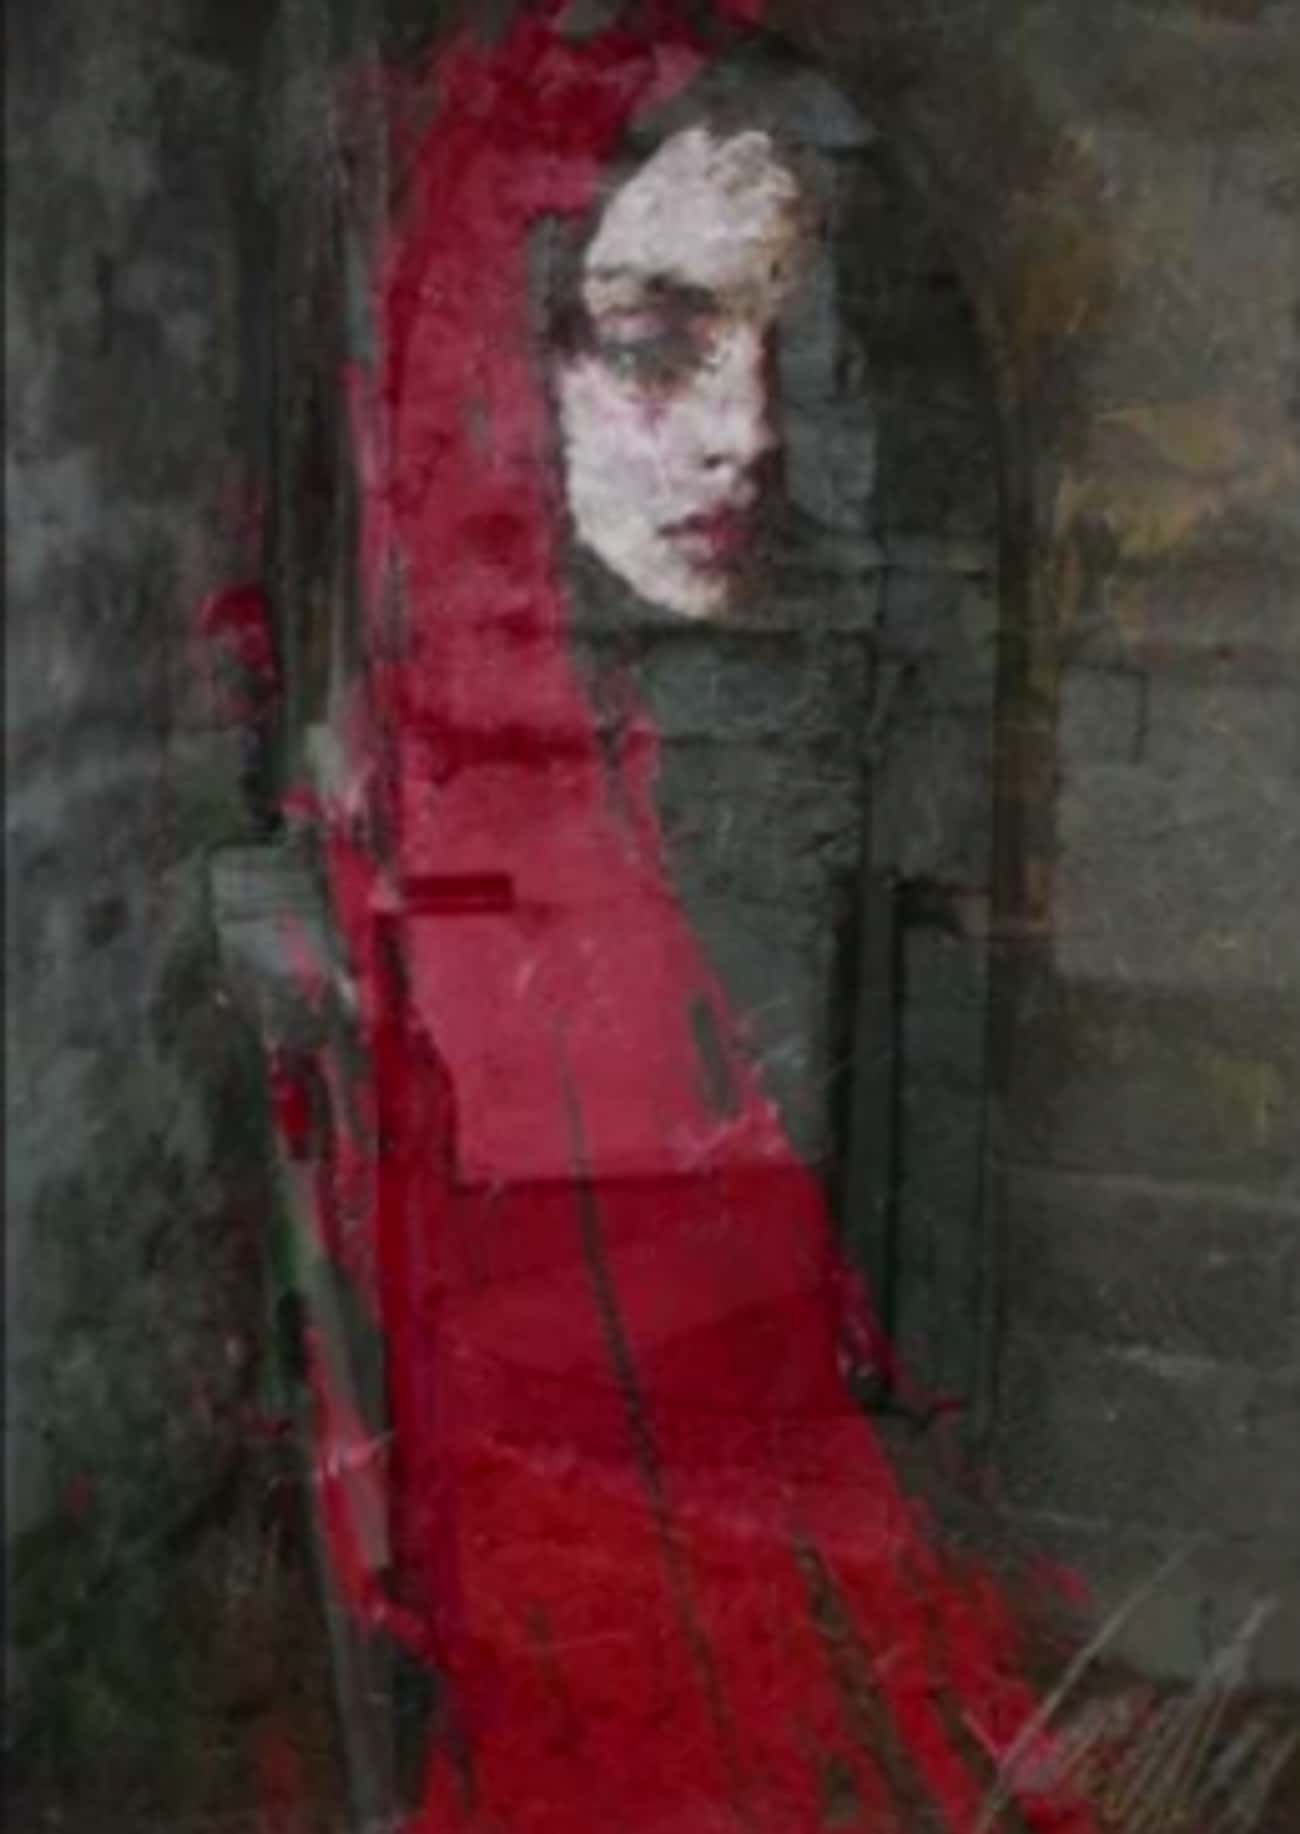 The Red Lady Haunted The Castle After The Murder Of Her Baby